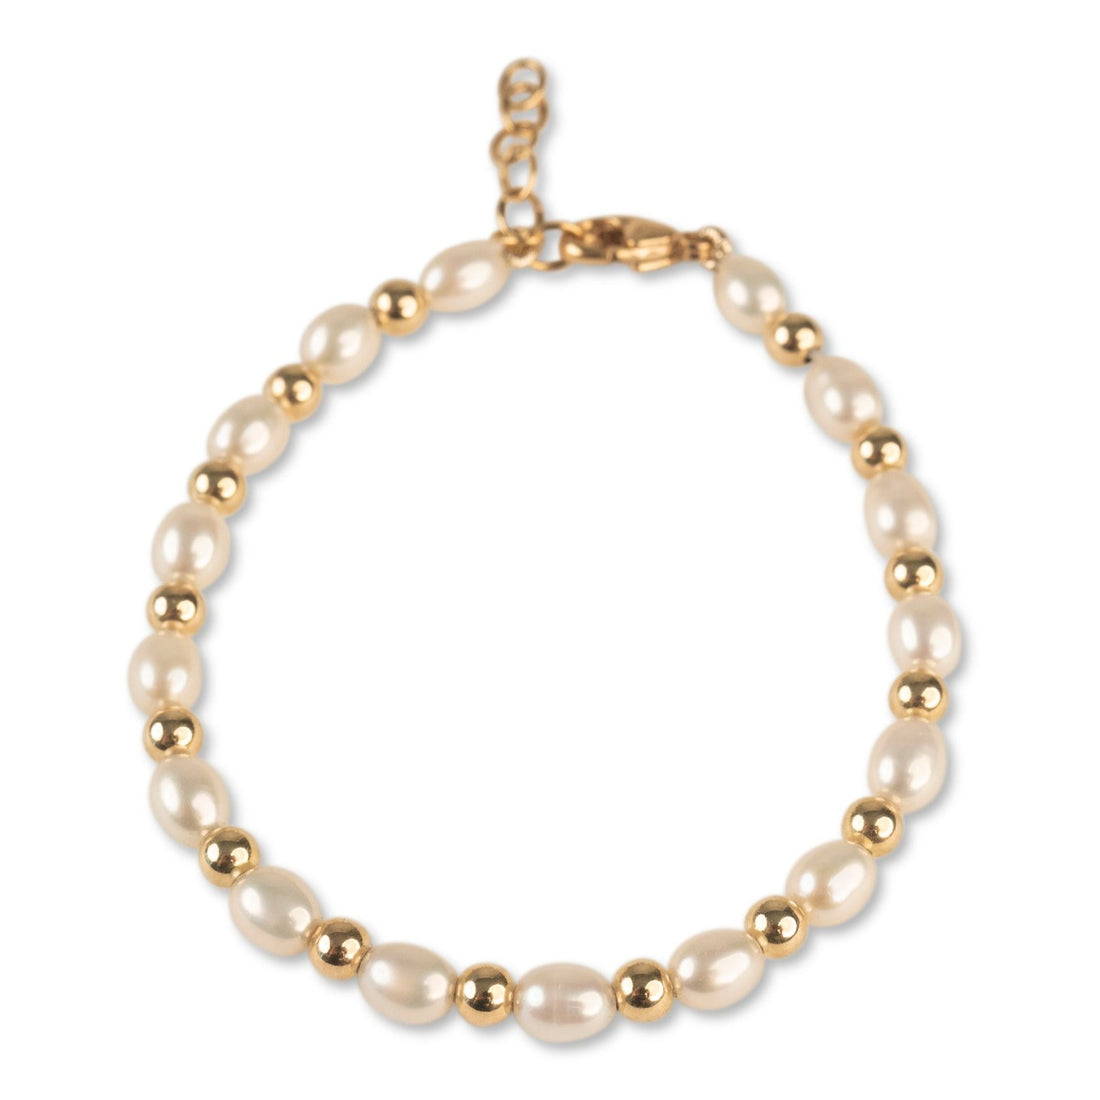 Gold GG faux-pearl chain bracelet | Gucci | MATCHES UK